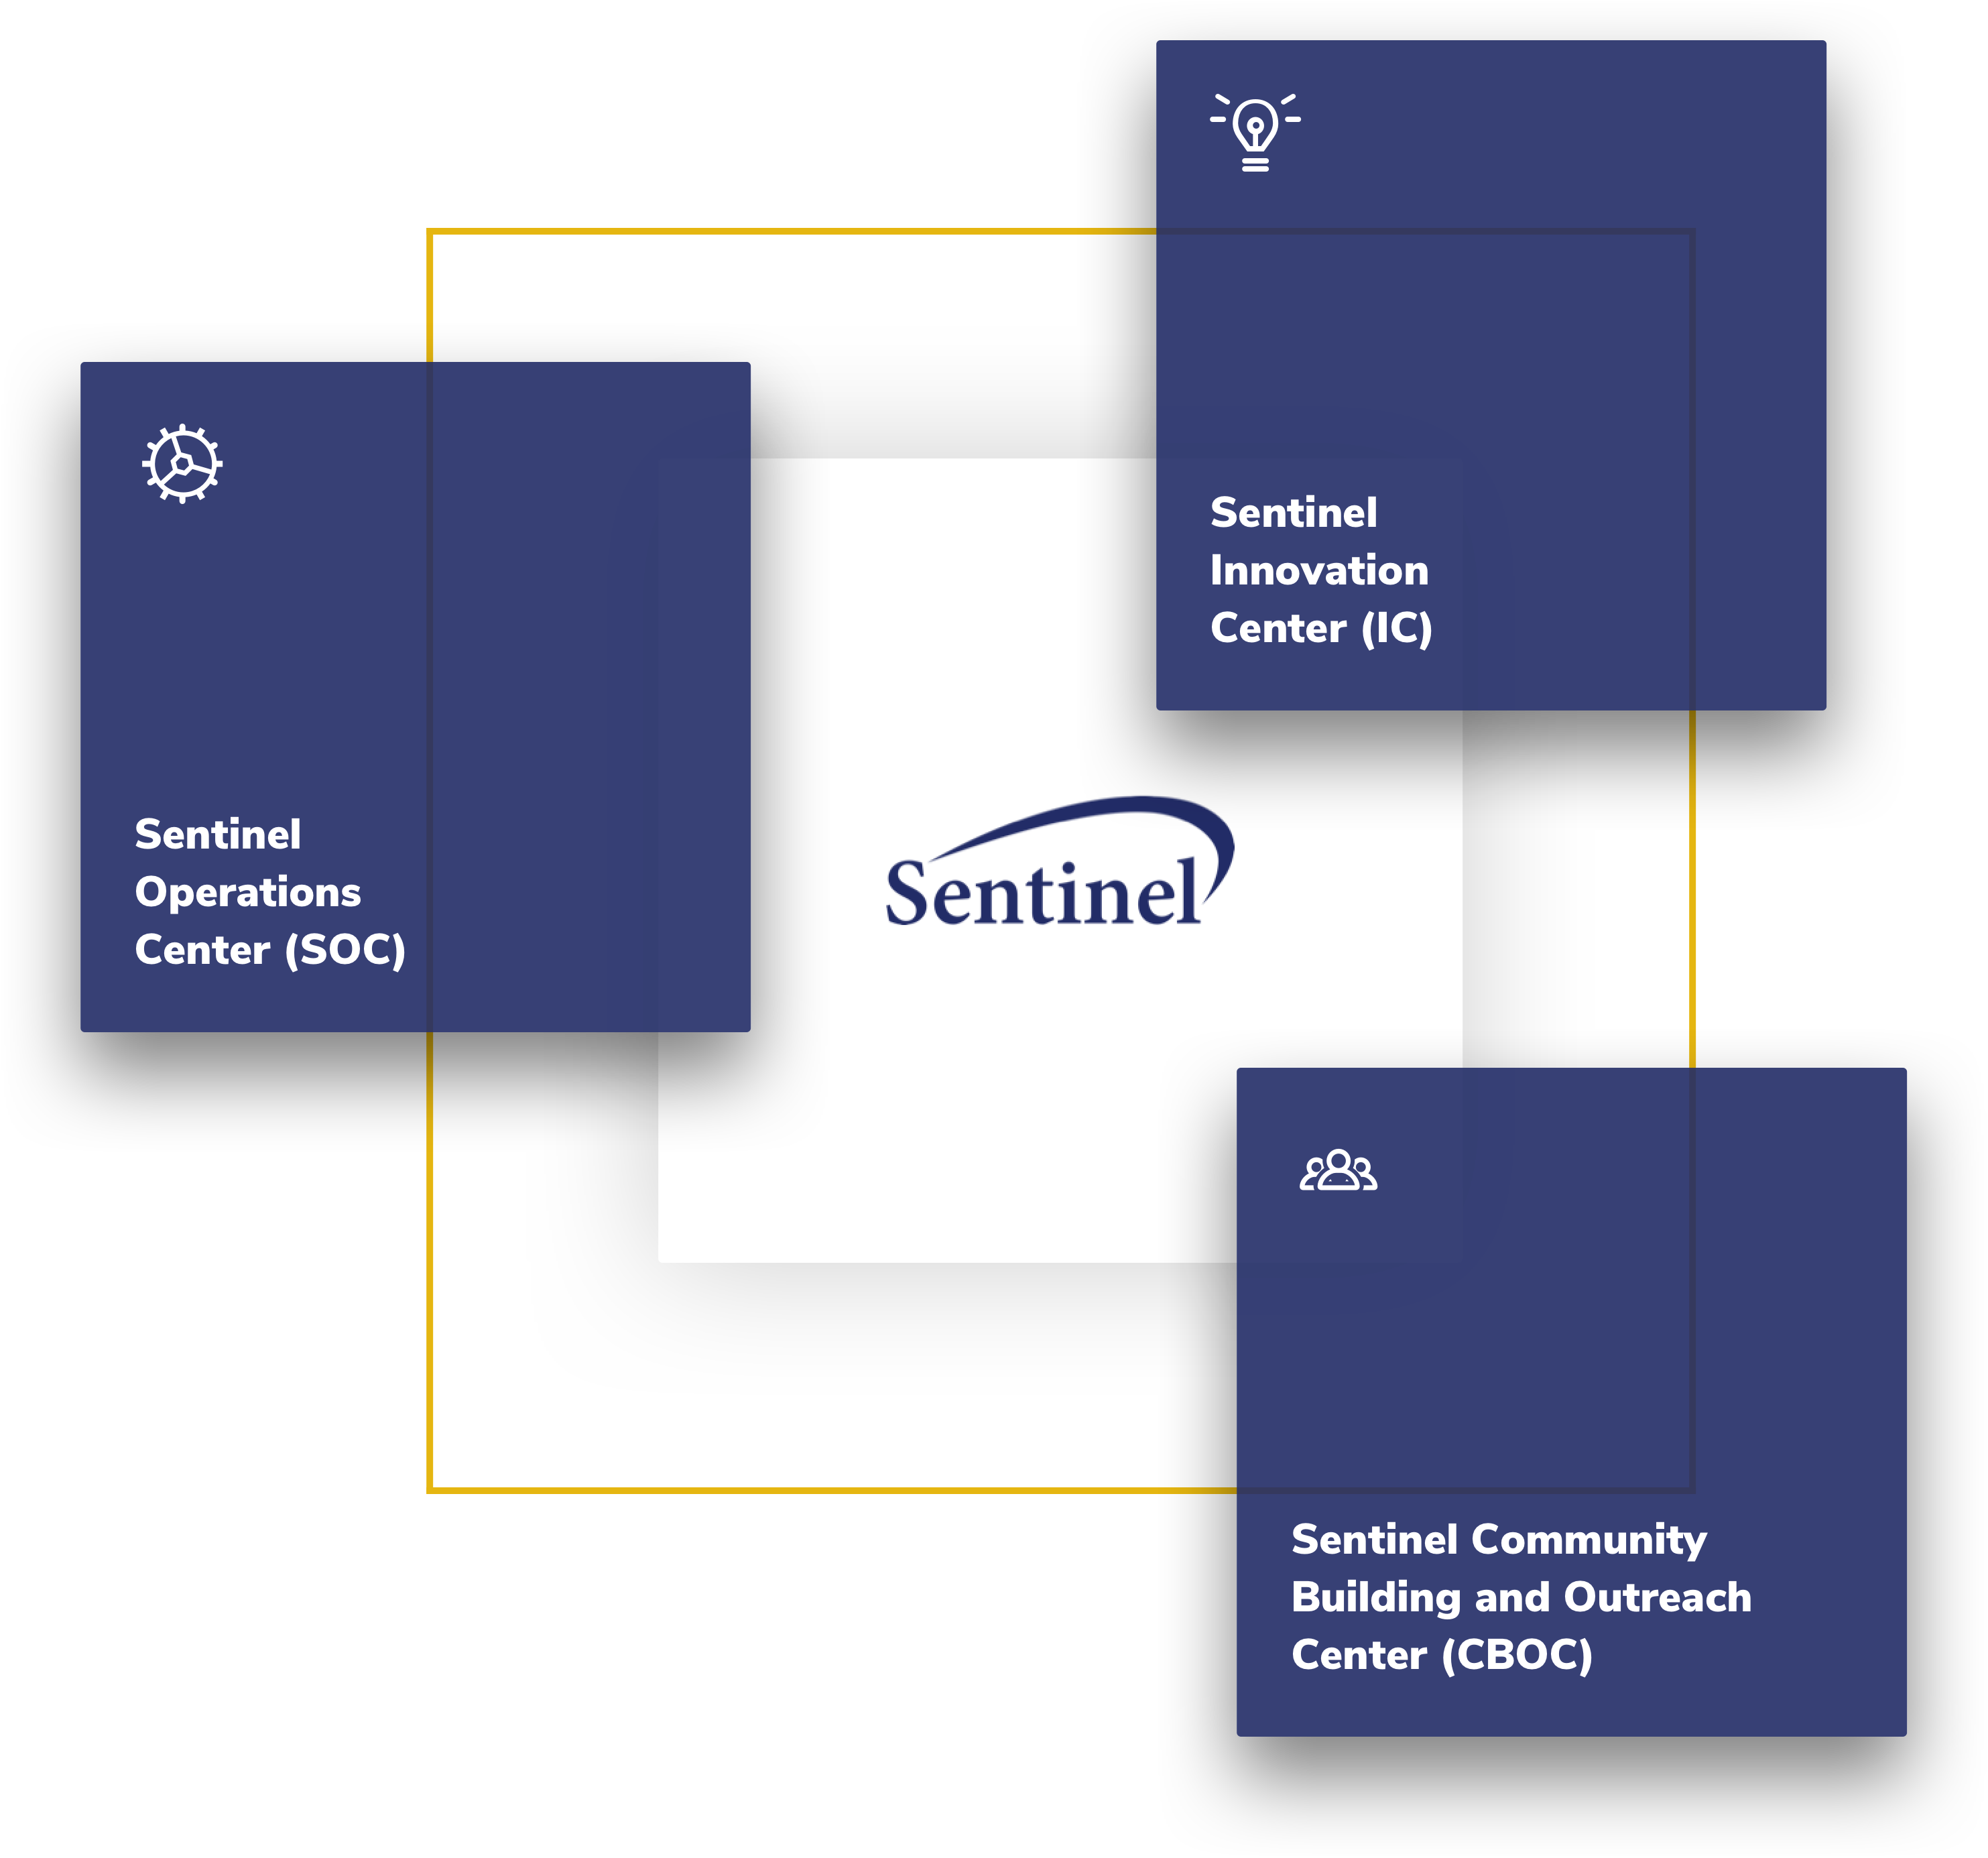 The Sentinel Initiative is lead by FDA in collaboration with its three centers, SOC, IC, CBOC